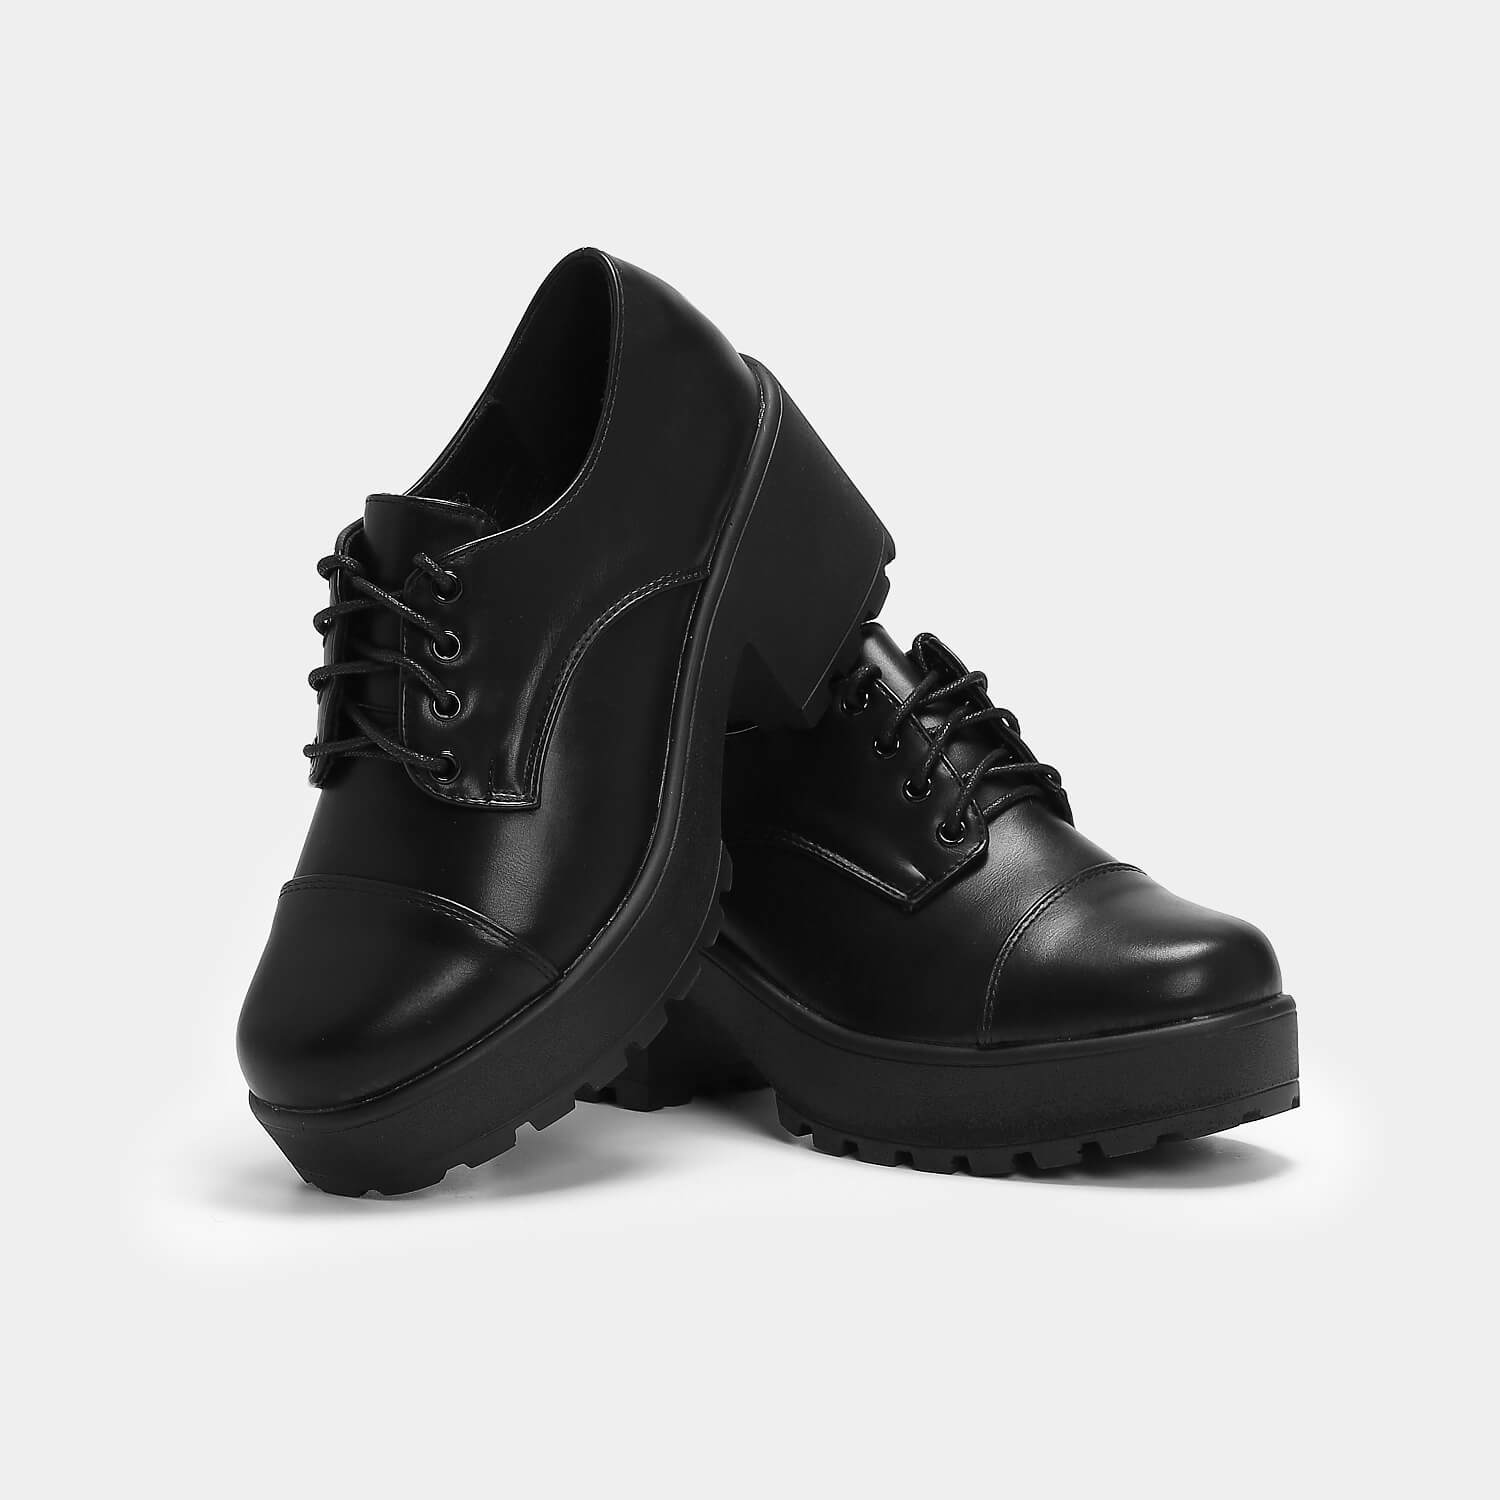 Rei Chunky Lace Up Shoes - Shoes - KOI Footwear - Black - Front Side View